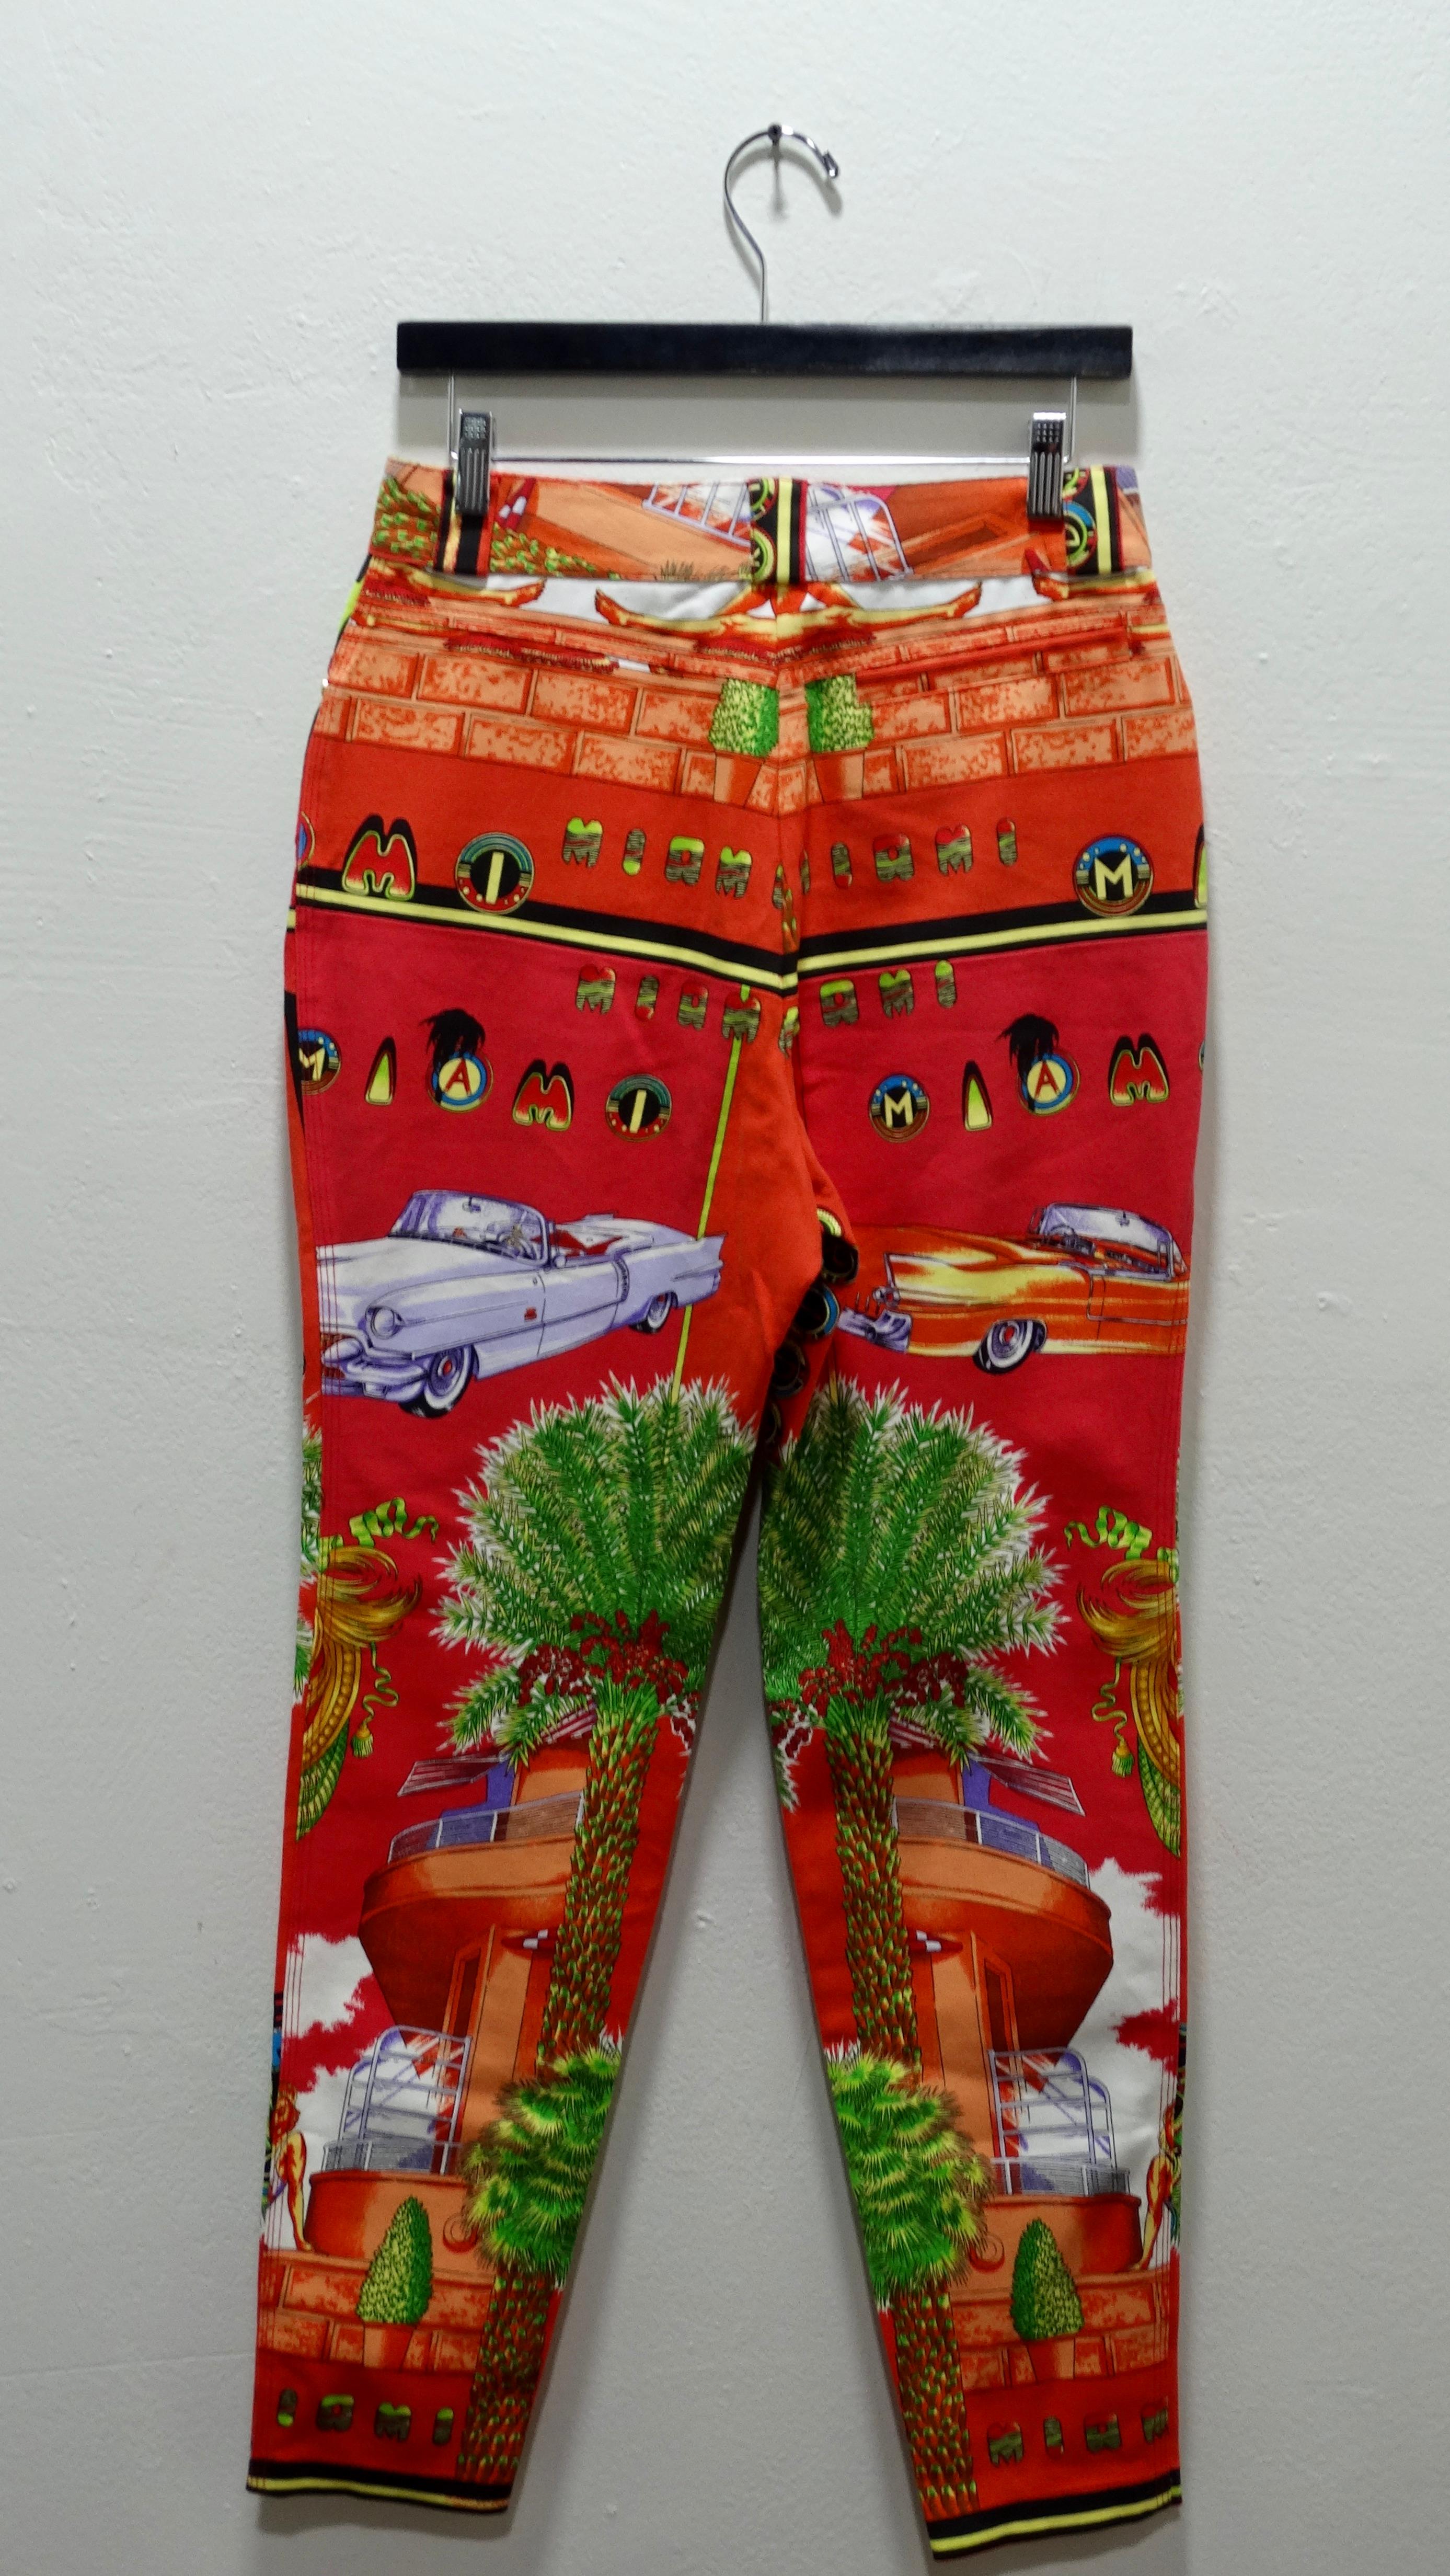 How hot are these jeans?! Sizzle all summer long in these red/orange Miami print jeans by Gianni Versace spring/summer 1993. Featuring a stunning red and orange base with iconic South Beach Miami emblems throughout. These jeans feature a zip fly and